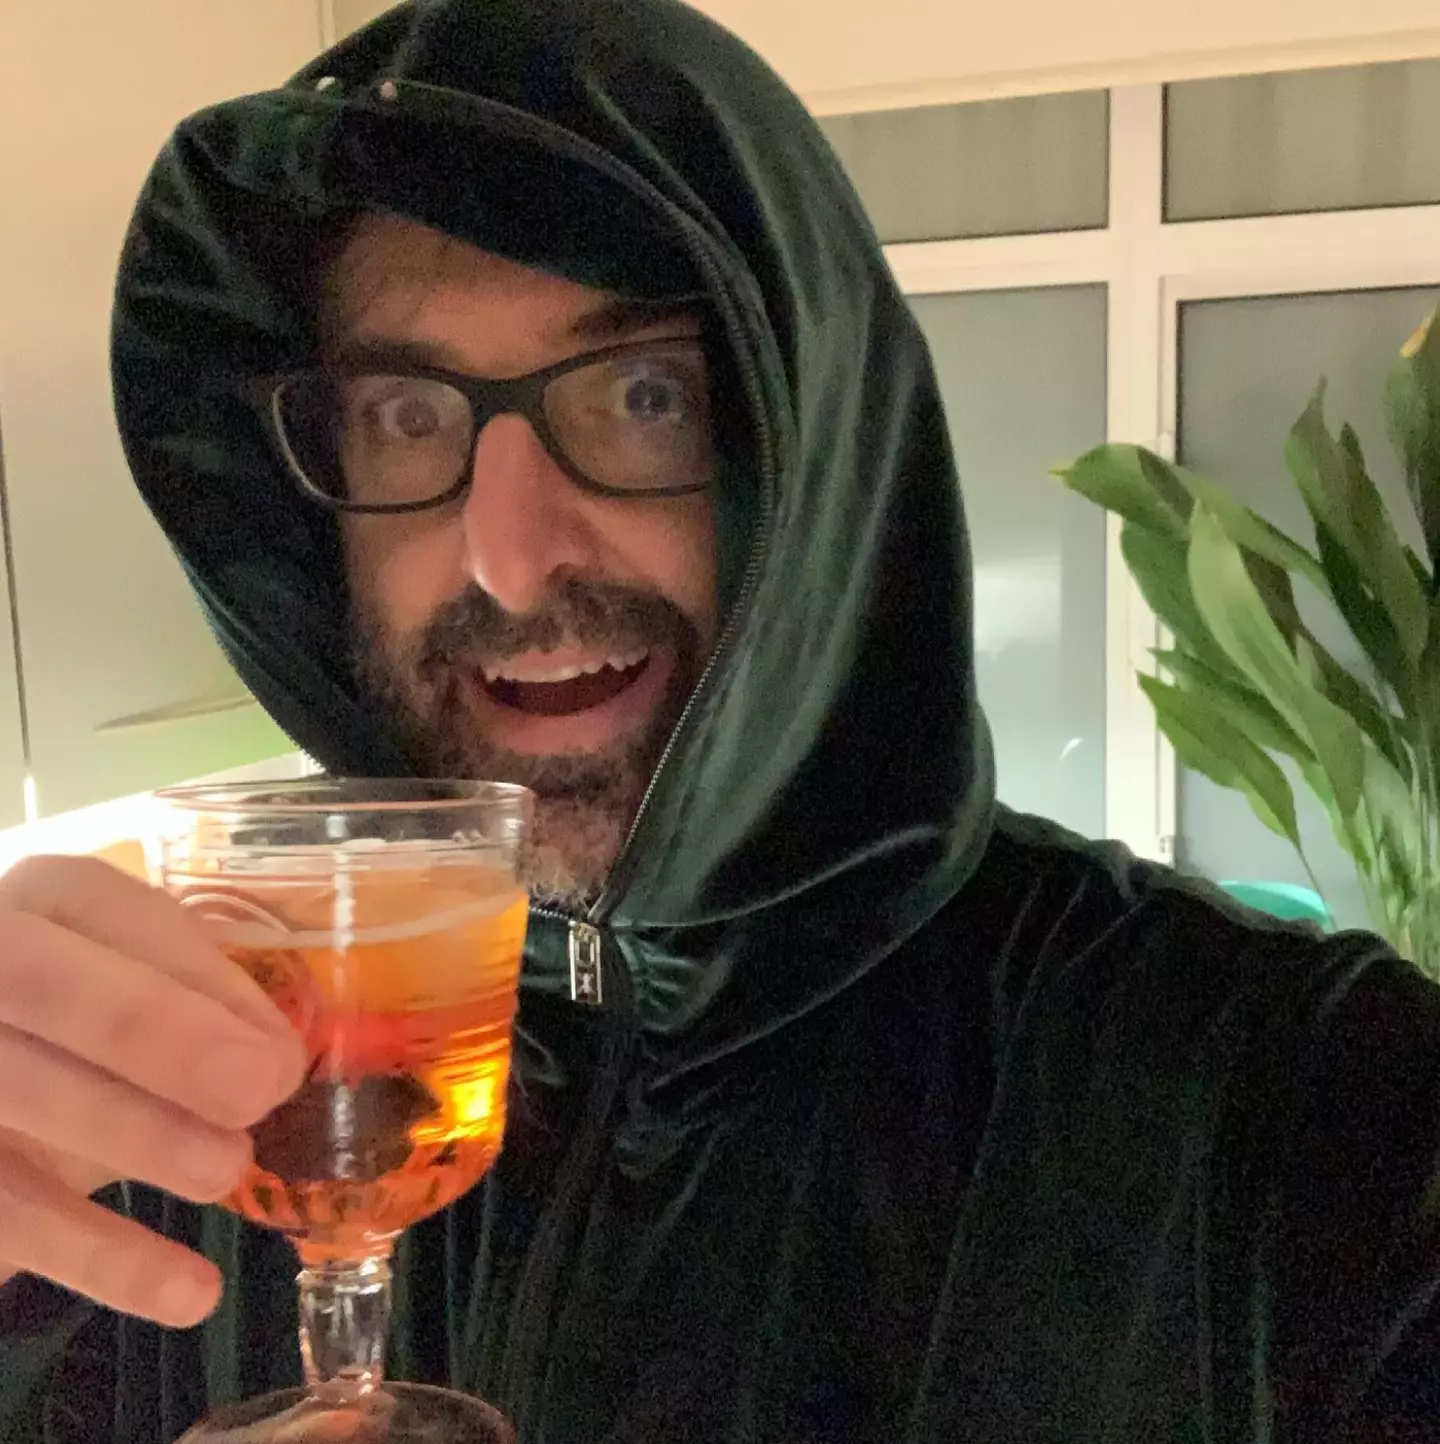 Theroux admitted to drinking a lot more at home during the lockdown.